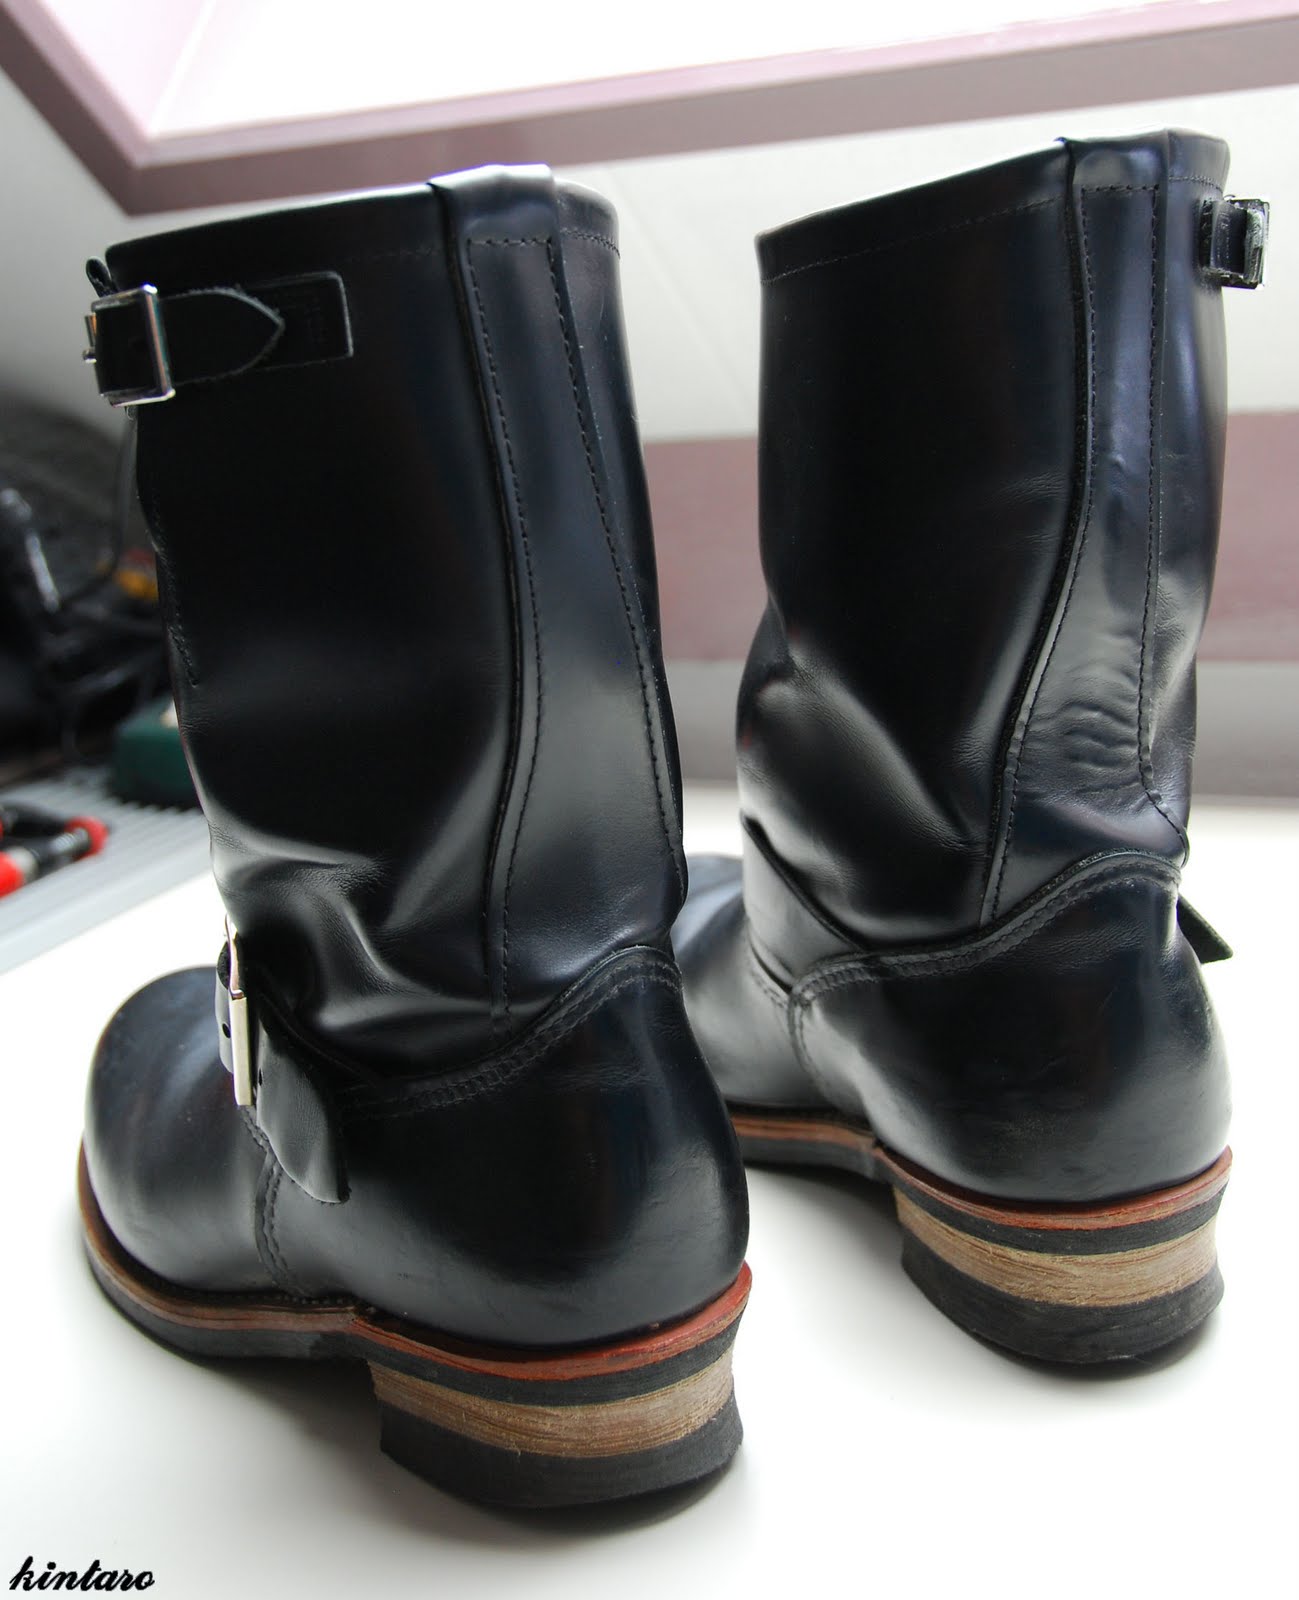 the kintaro and the koi: Red Wing 2268 engineer boots evo